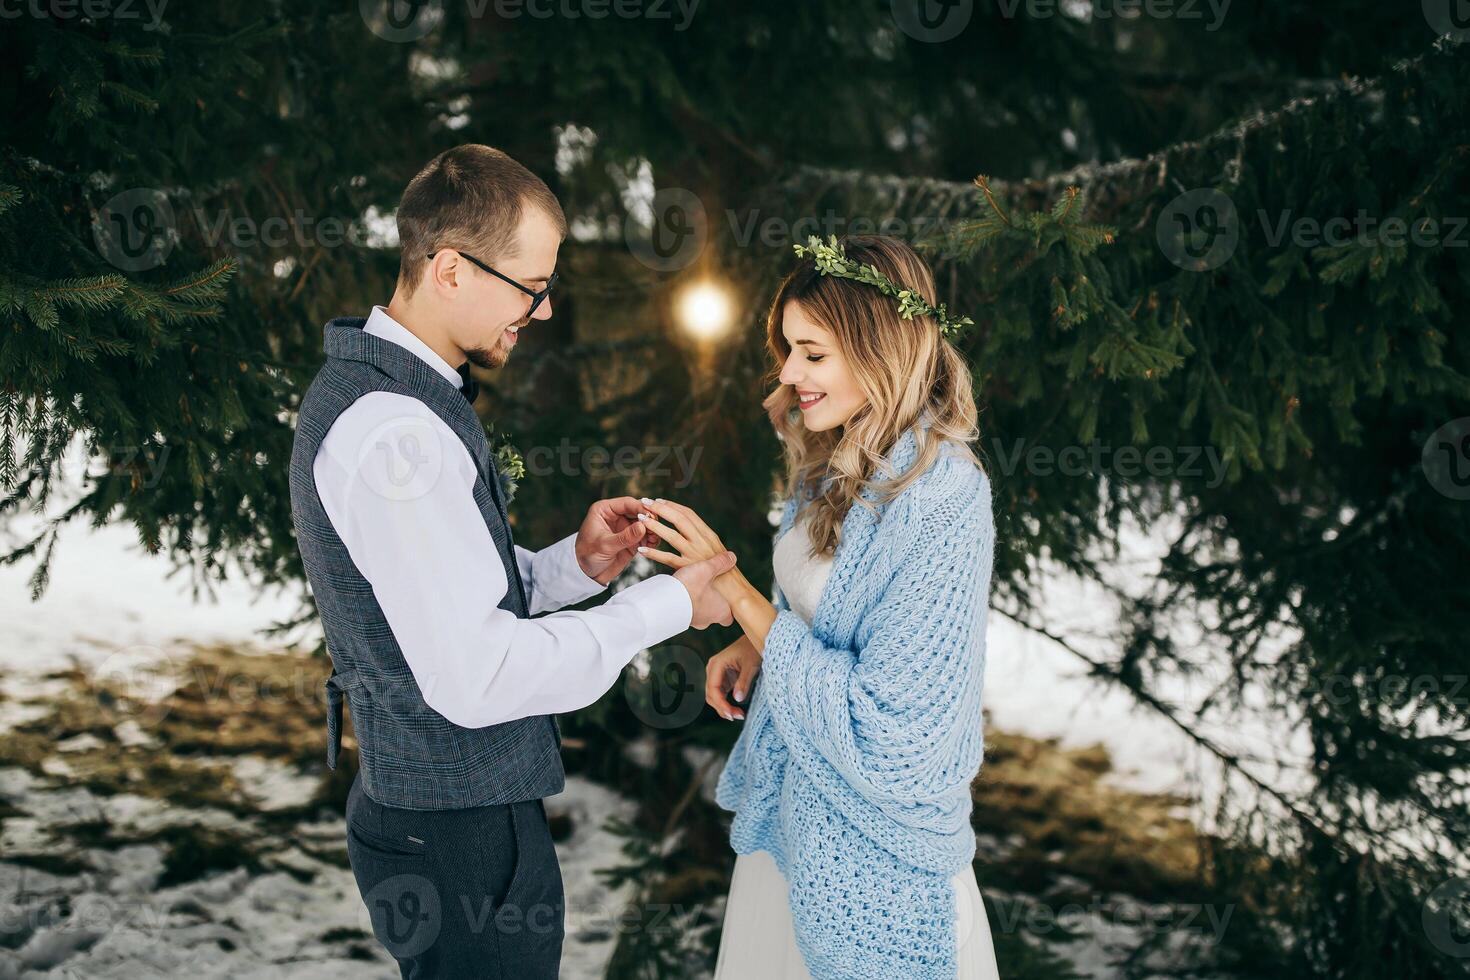 Newlyweds at the wedding ceremony. The groom puts on the bride's wedding ring. High quality photo. Winter wedding. photo